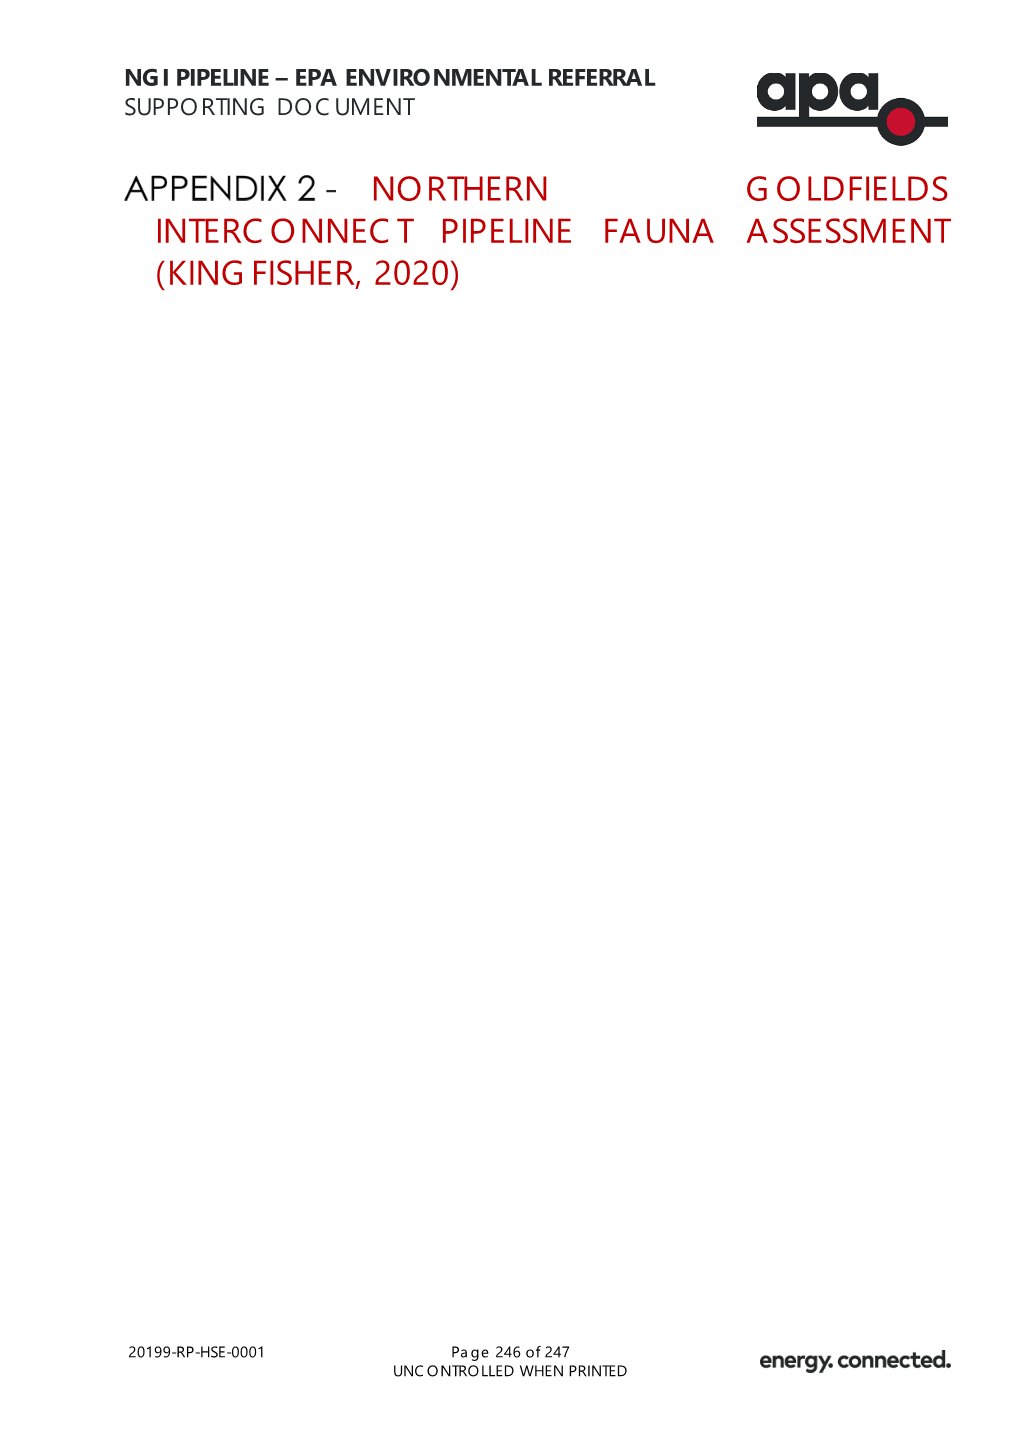 Northern Goldfields Interconnect Pipeline Fauna Assessment (Kingfisher, 2020)